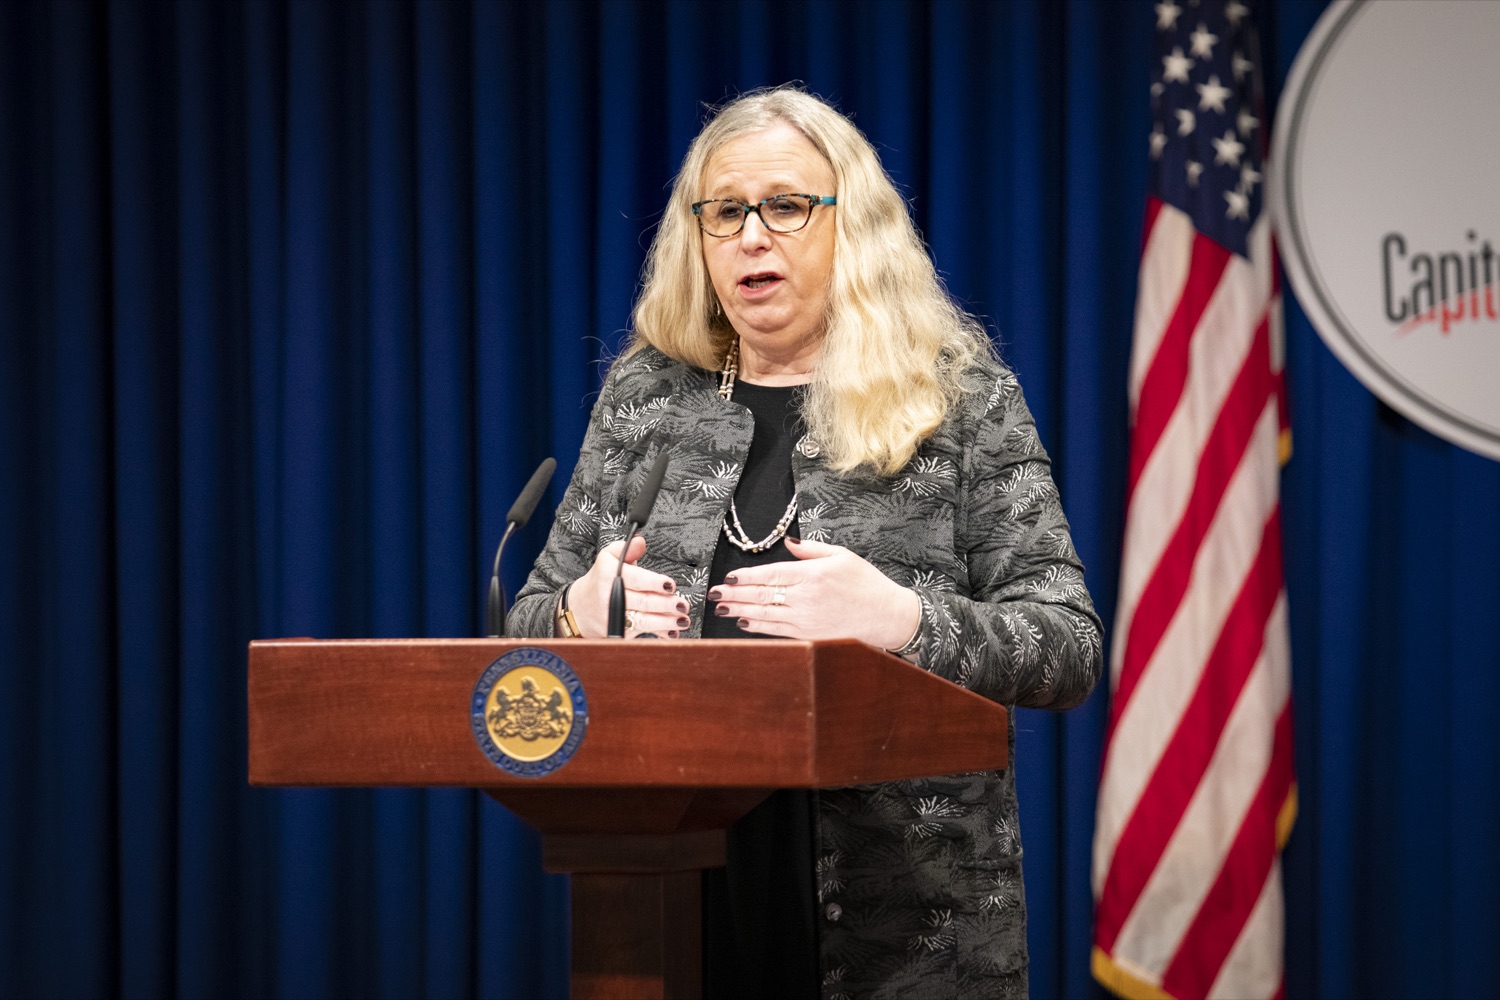 Secretary of Health Dr. Rachel Levine discusses the proactive approach the Wolf Administration has taken in the event of community spread of the coronavirus, also known as COVID-19, at the Harrisburg Capitol on February 26, 2020.<br><a href="https://filesource.amperwave.net/commonwealthofpa/photo/17819_DOH_CORONA_VIRUS_CZ_05.jpg" target="_blank">⇣ Download Photo</a>